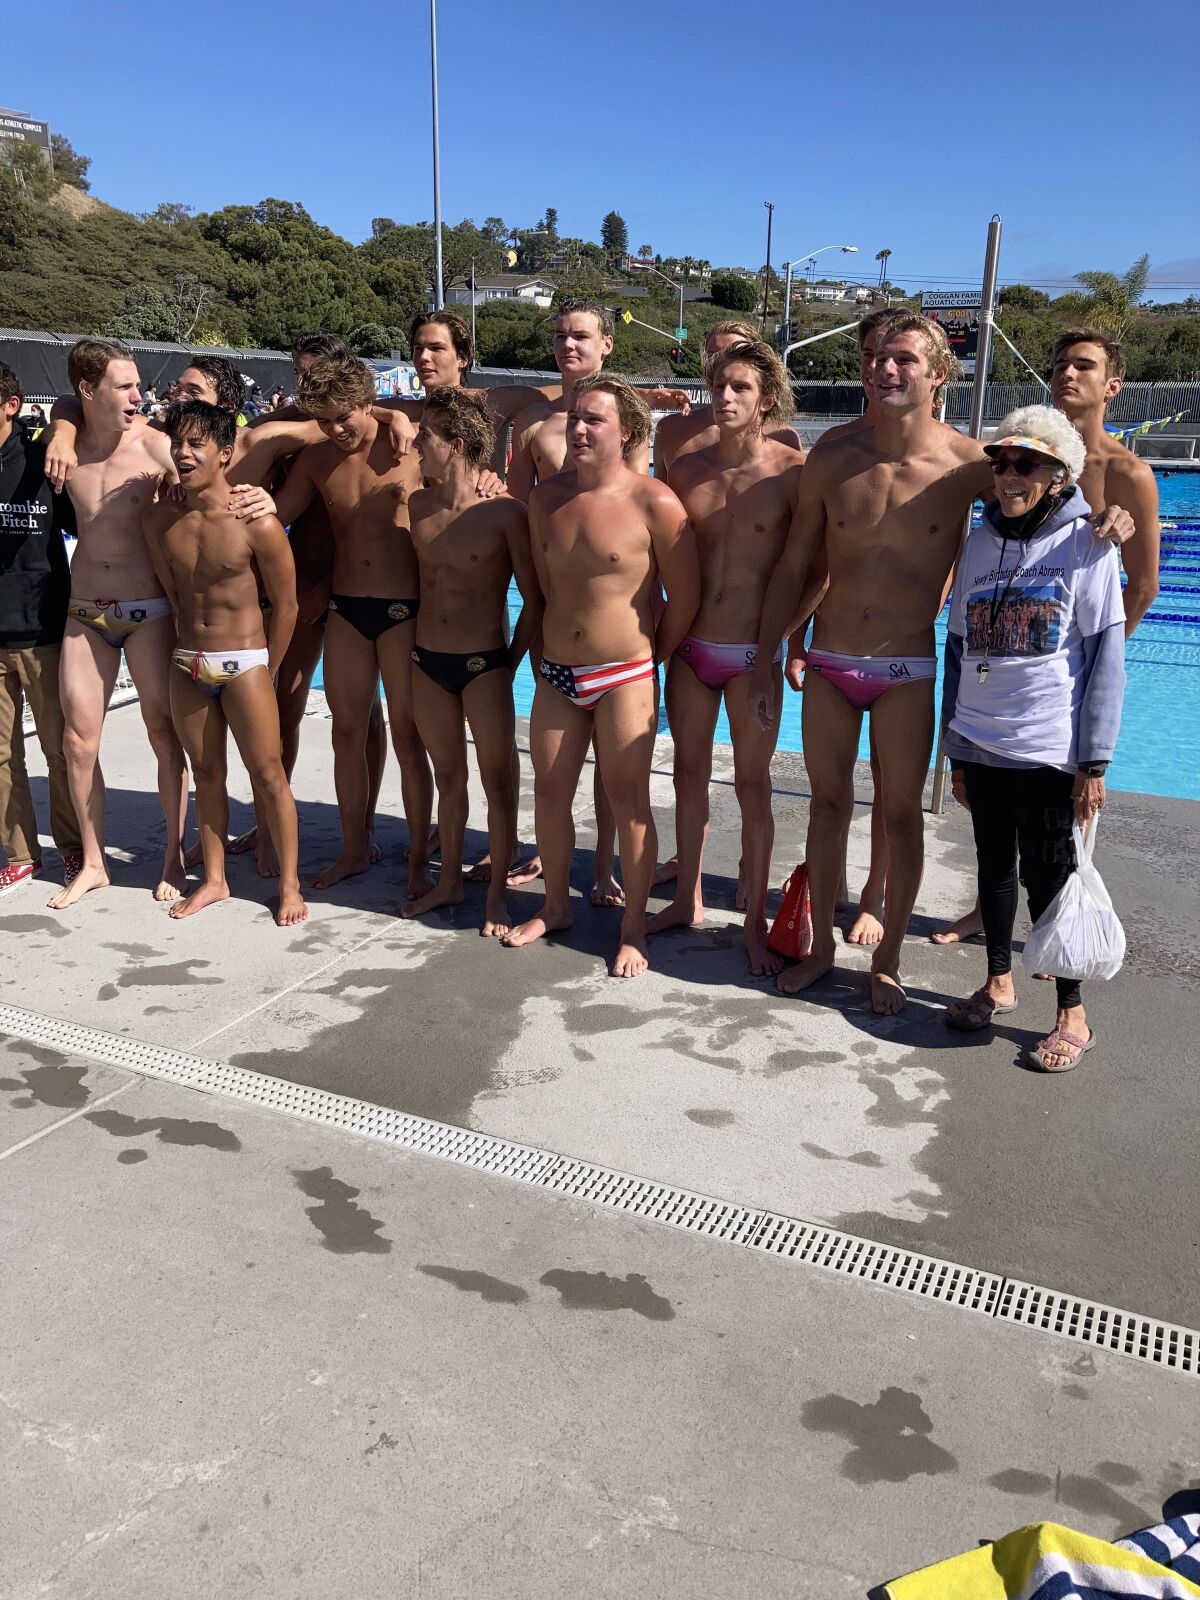 Joyce Abrams stands with the La Jolla High School 2020-21 boys water polo team, which named her its honorary coach.